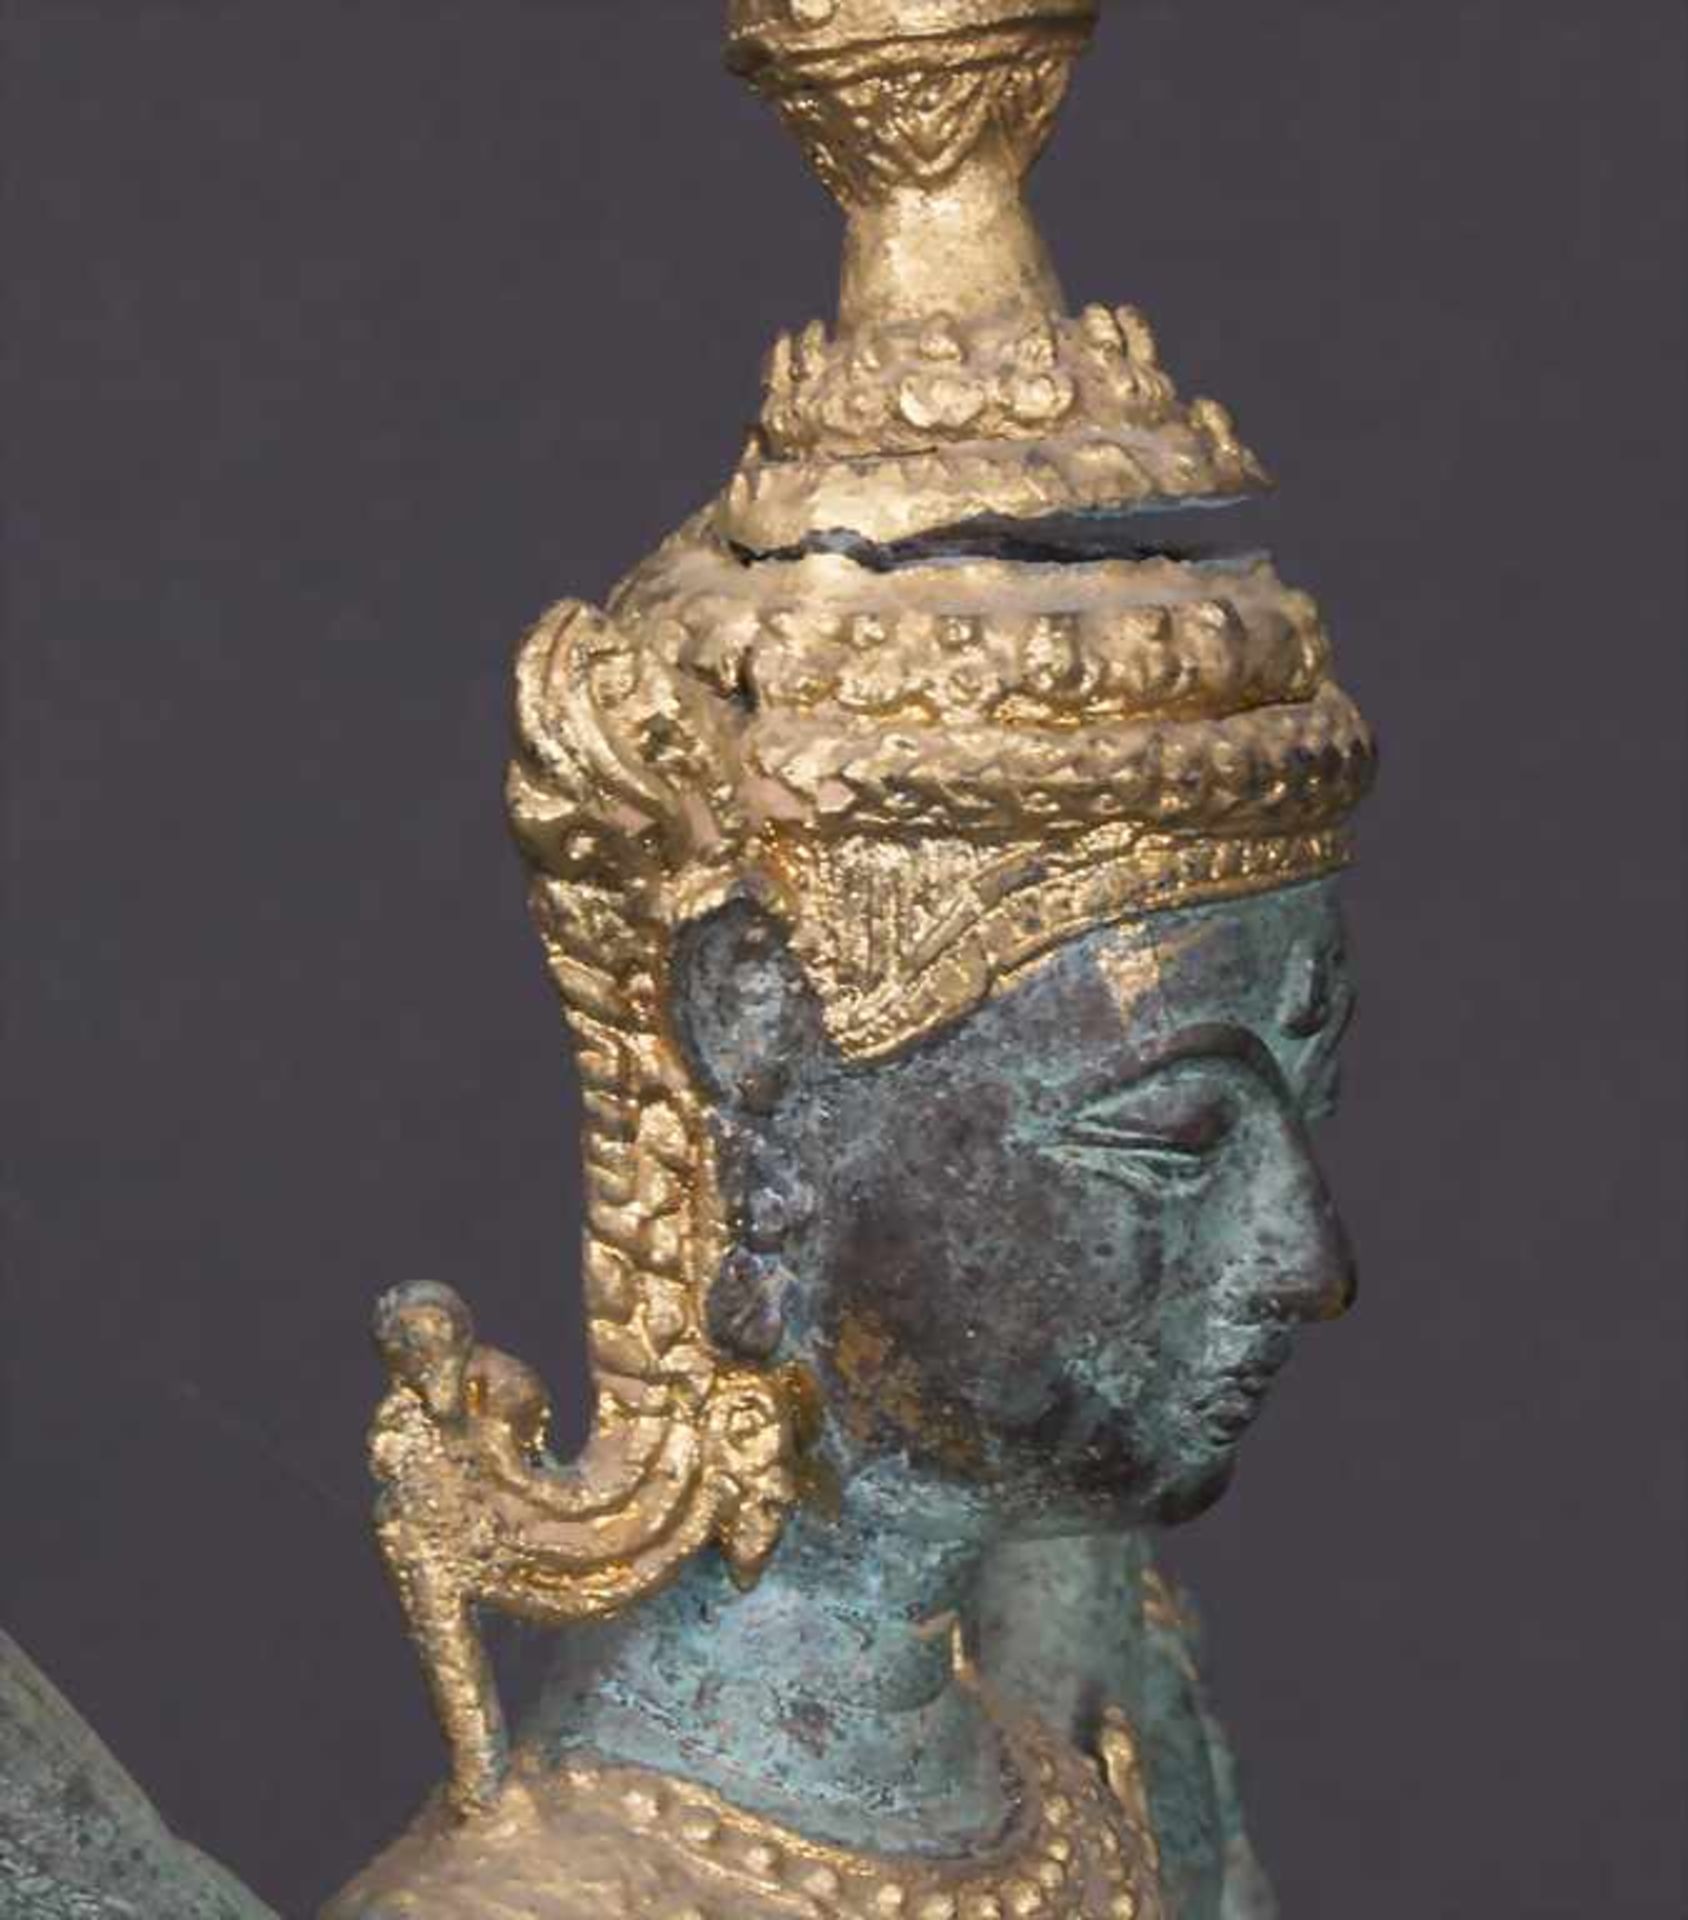 Bronzefigur 'Tempelwächter auf heiliger Kuh' / 'A temple guard on a holy cow', Thailand, 20. Jh. - Image 6 of 6